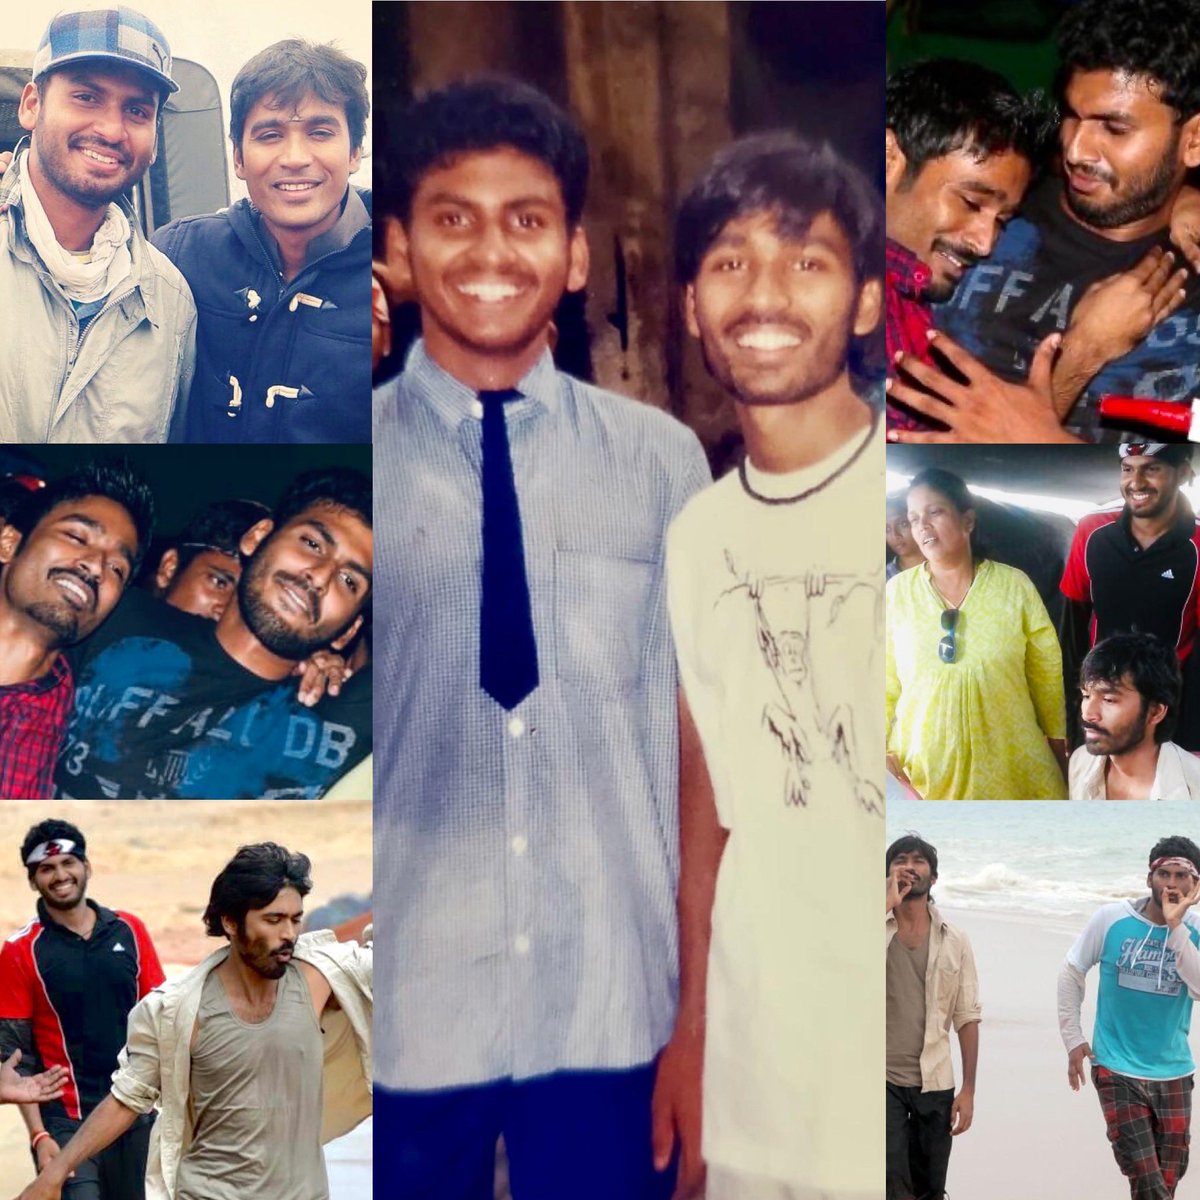 My blessed HappyBirthday to
The versatile multitalented actor the one and only @dhanushkraja sir 🎂🎉
God bless you with good health and lots of happiness sir♥️ wishing you an amazing year ✨ #HappyBirthdayDhanush #HBDDhanush @dhanushfans24x7 @dhanushfanclub #HBDDhanush